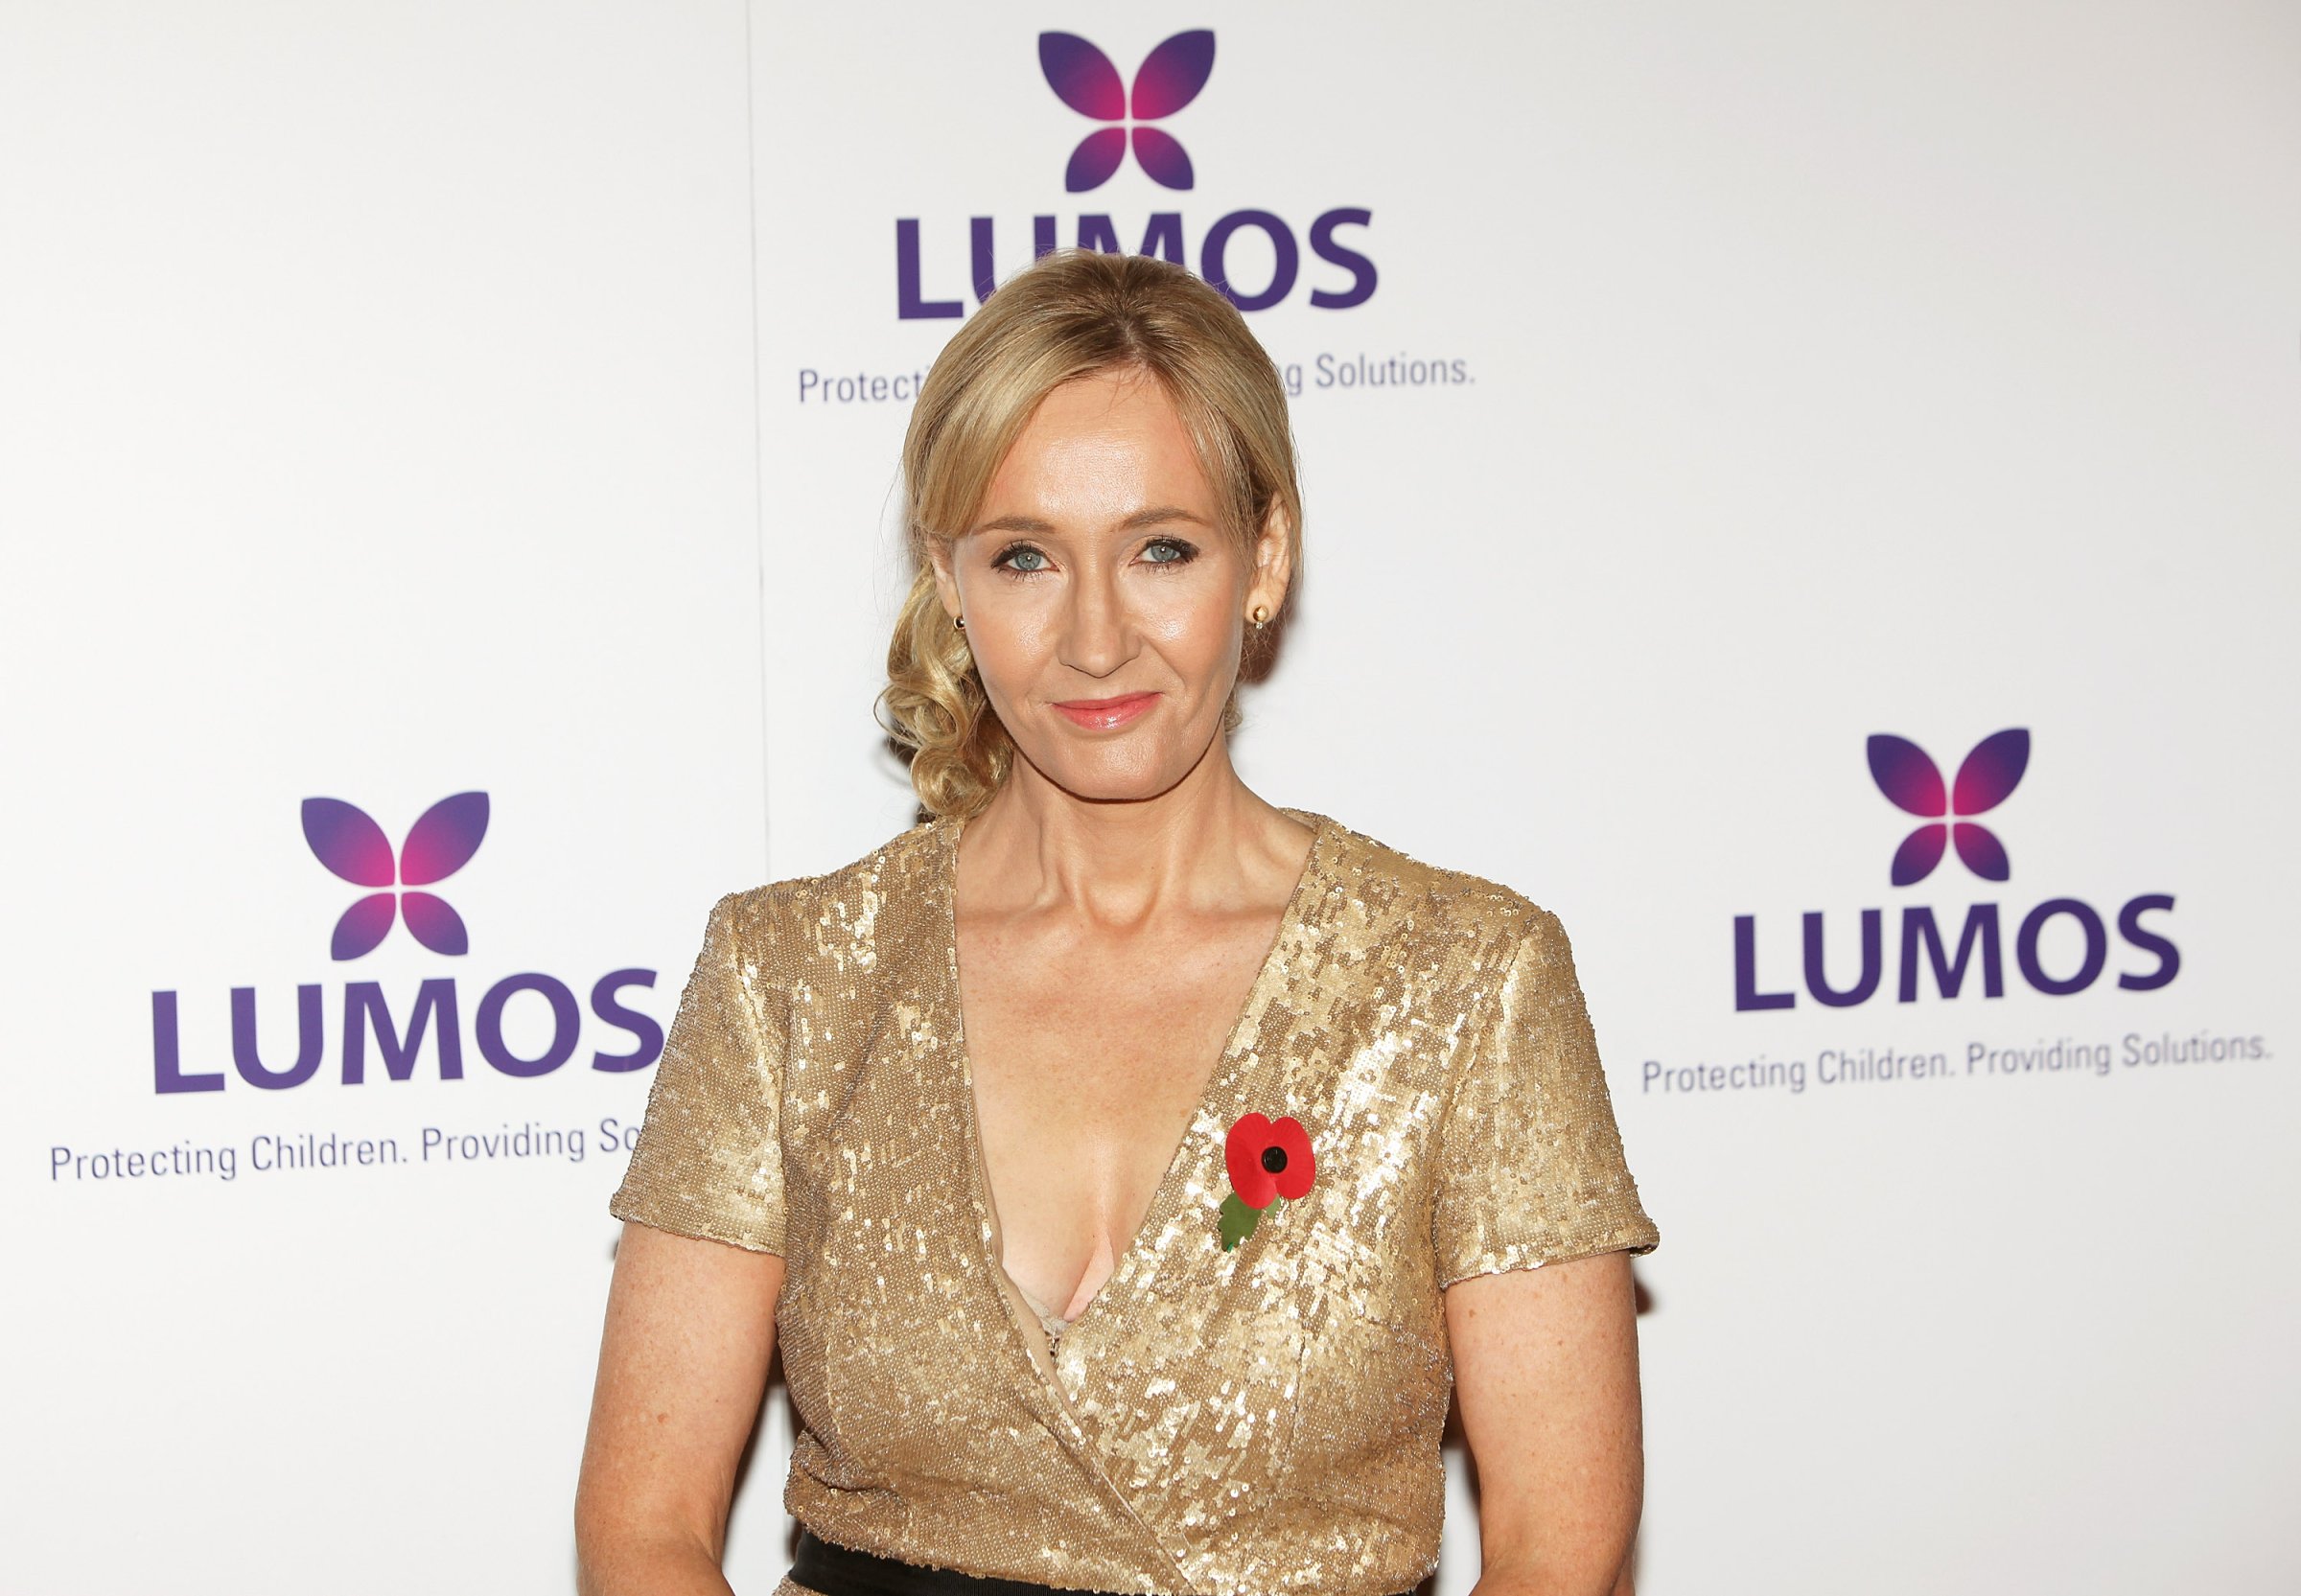 J.K. Rowling attends the Lumos fundraising event hosted by J.K. Rowling at The Warner Bros. Harry Potter Tour on November 9, 2013 in London, England.